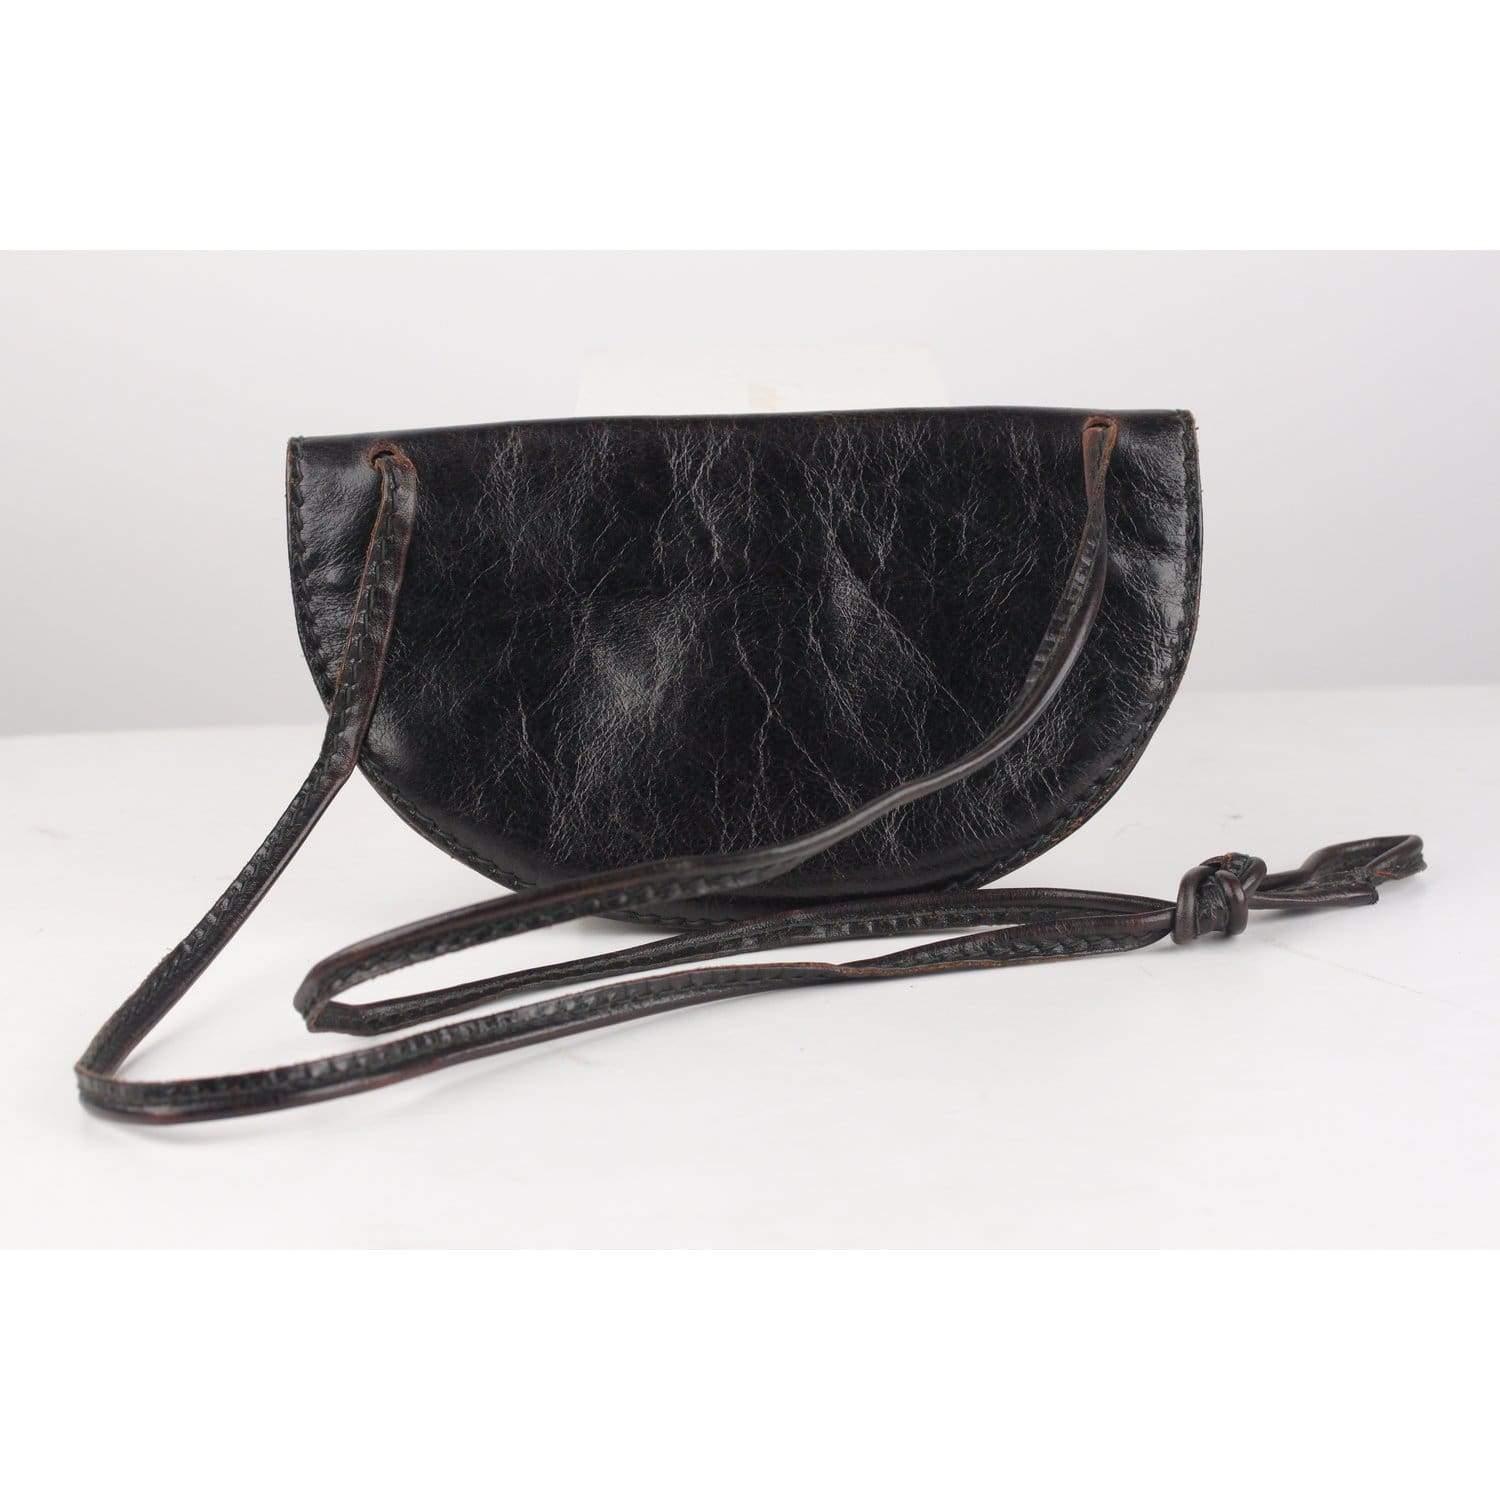 MATERIAL: Leather COLOR: Black MODEL: Messenger Bag GENDER: Women SIZE: Small Condition CONDITION DETAILS: B :GOOD CONDITION - Some light wear of use - some scratches and creases on leather due to normal use Measurements MEASUREMENTS: BAG HEIGHT: